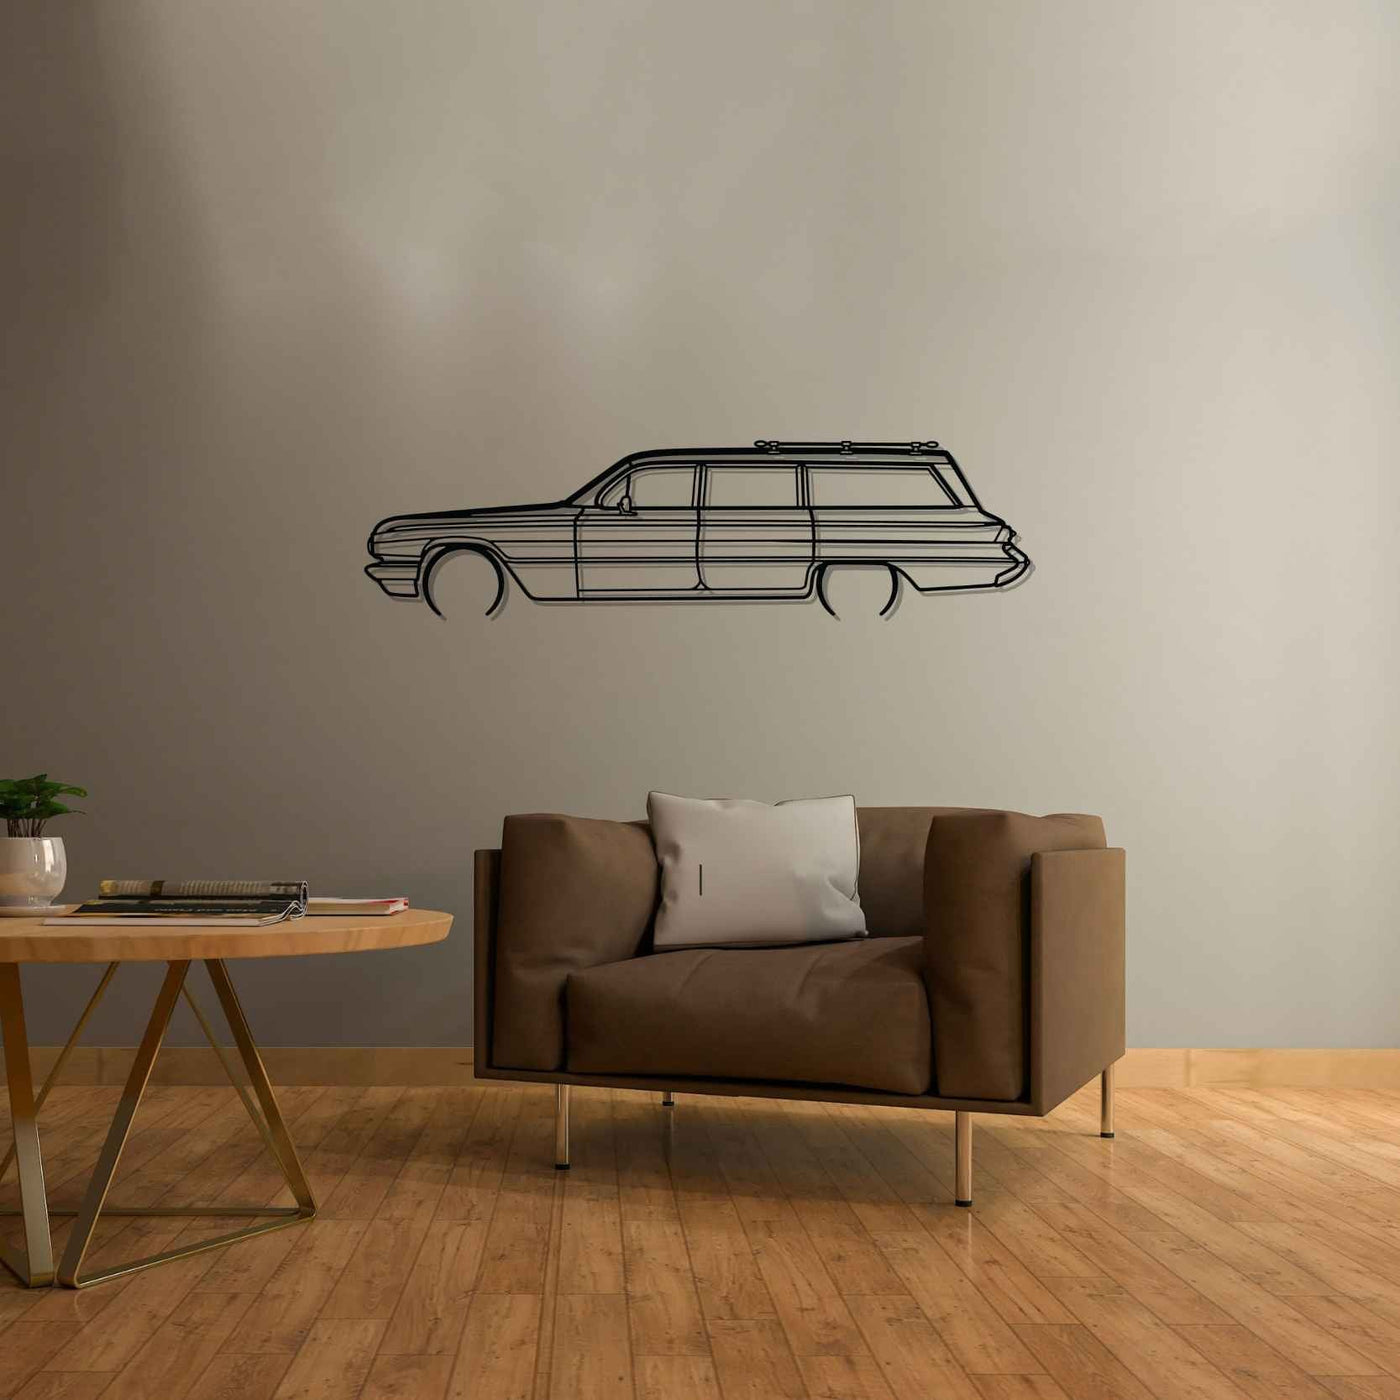 Invicta Station Wagon 1962 Detailed Silhouette Metal Wall Art